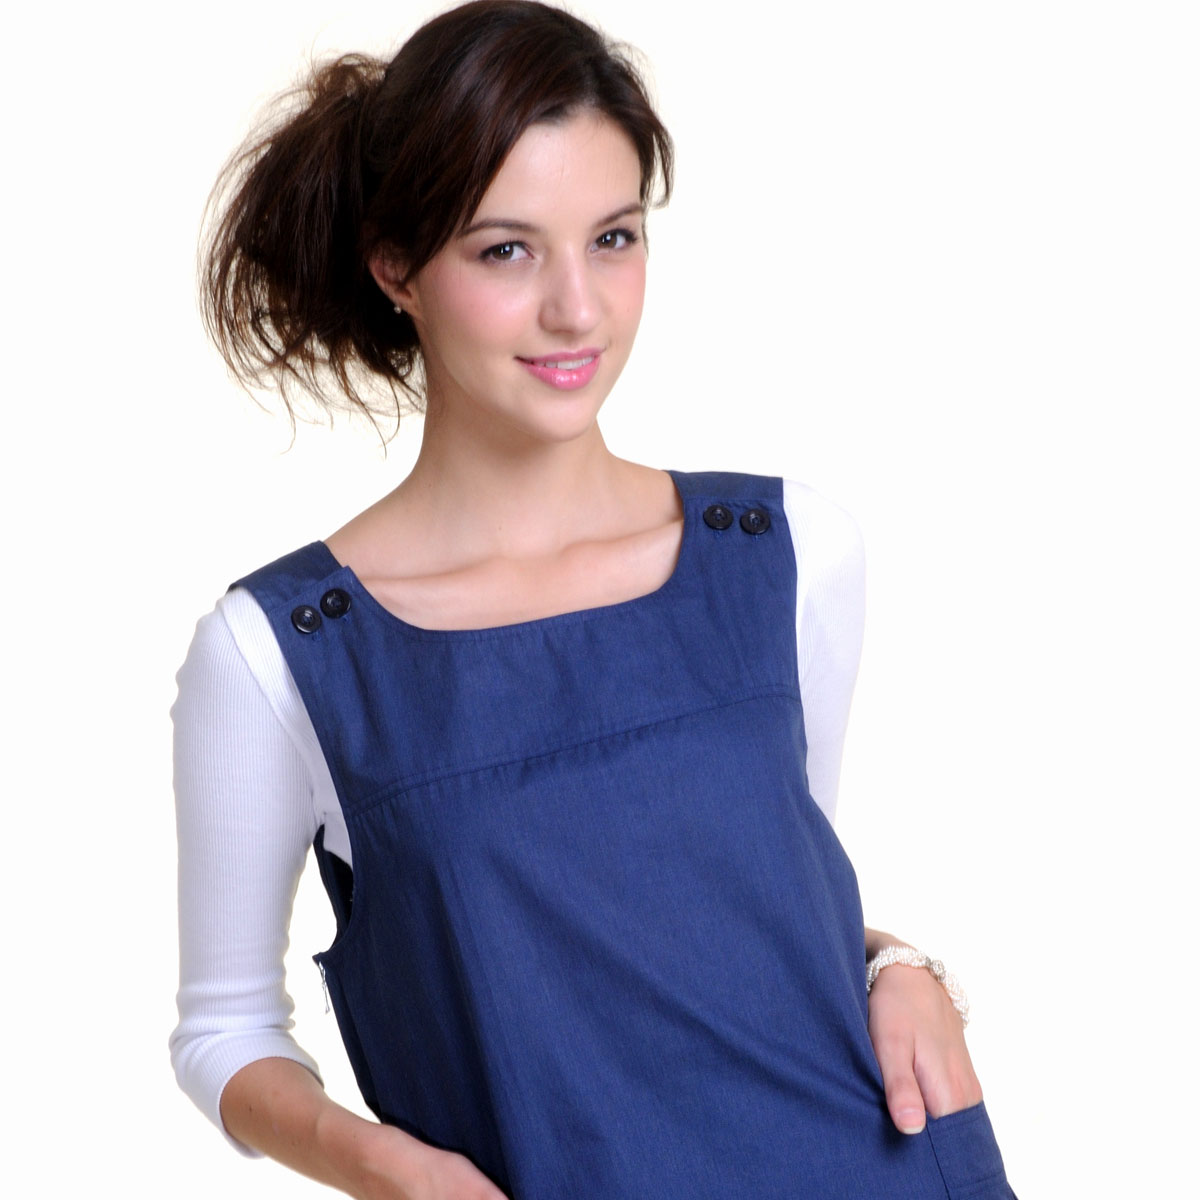 Radiation-resistant maternity clothing maternity radiation-resistant vest f009 silver fiber radiation-resistant bellyached